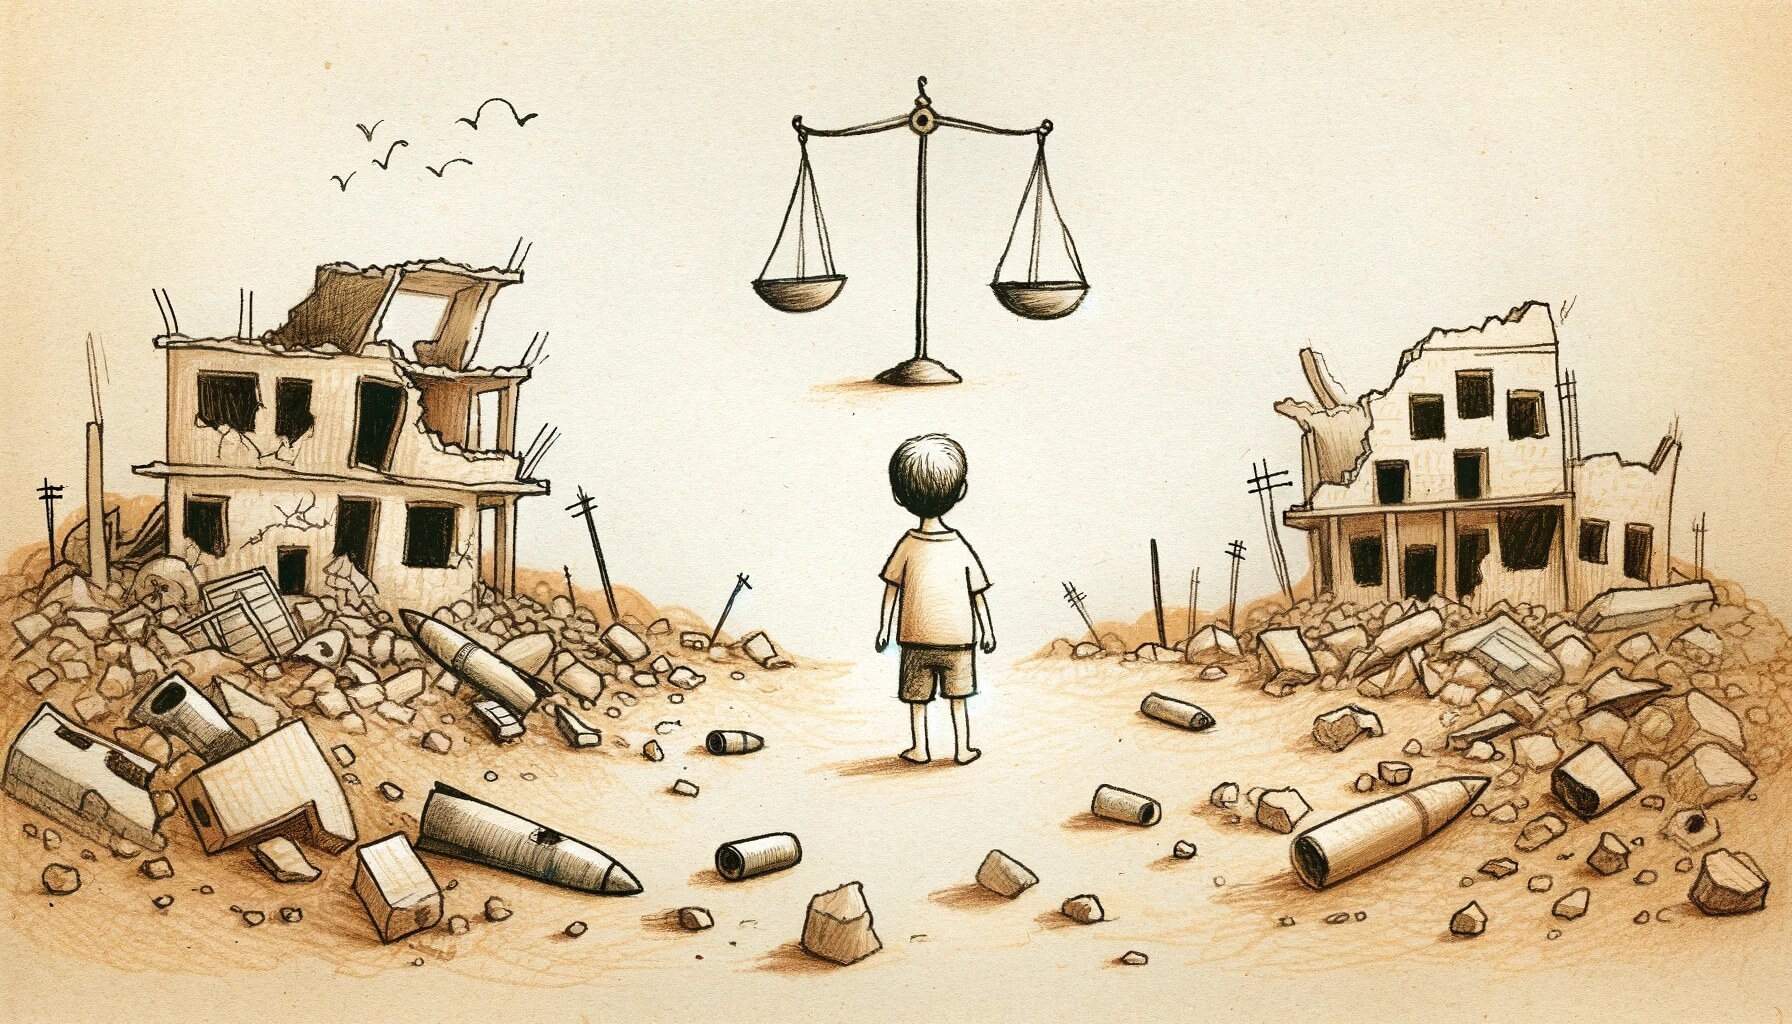 A powerful monochromatic illustration shows a child standing in the middle of a war-torn area, with ruins of buildings and scattered debris, including bomb shells, on either side. Above the child, a large balanced scale floats, symbolizing justice. The image represents the integration of zkSafeZones with legal frameworks, highlighting how automated enforcement of international laws through smart contracts ensures compliance and accountability in conflict zones. This system aims to provide a robust legal framework for monitoring and holding parties responsible for their actions.